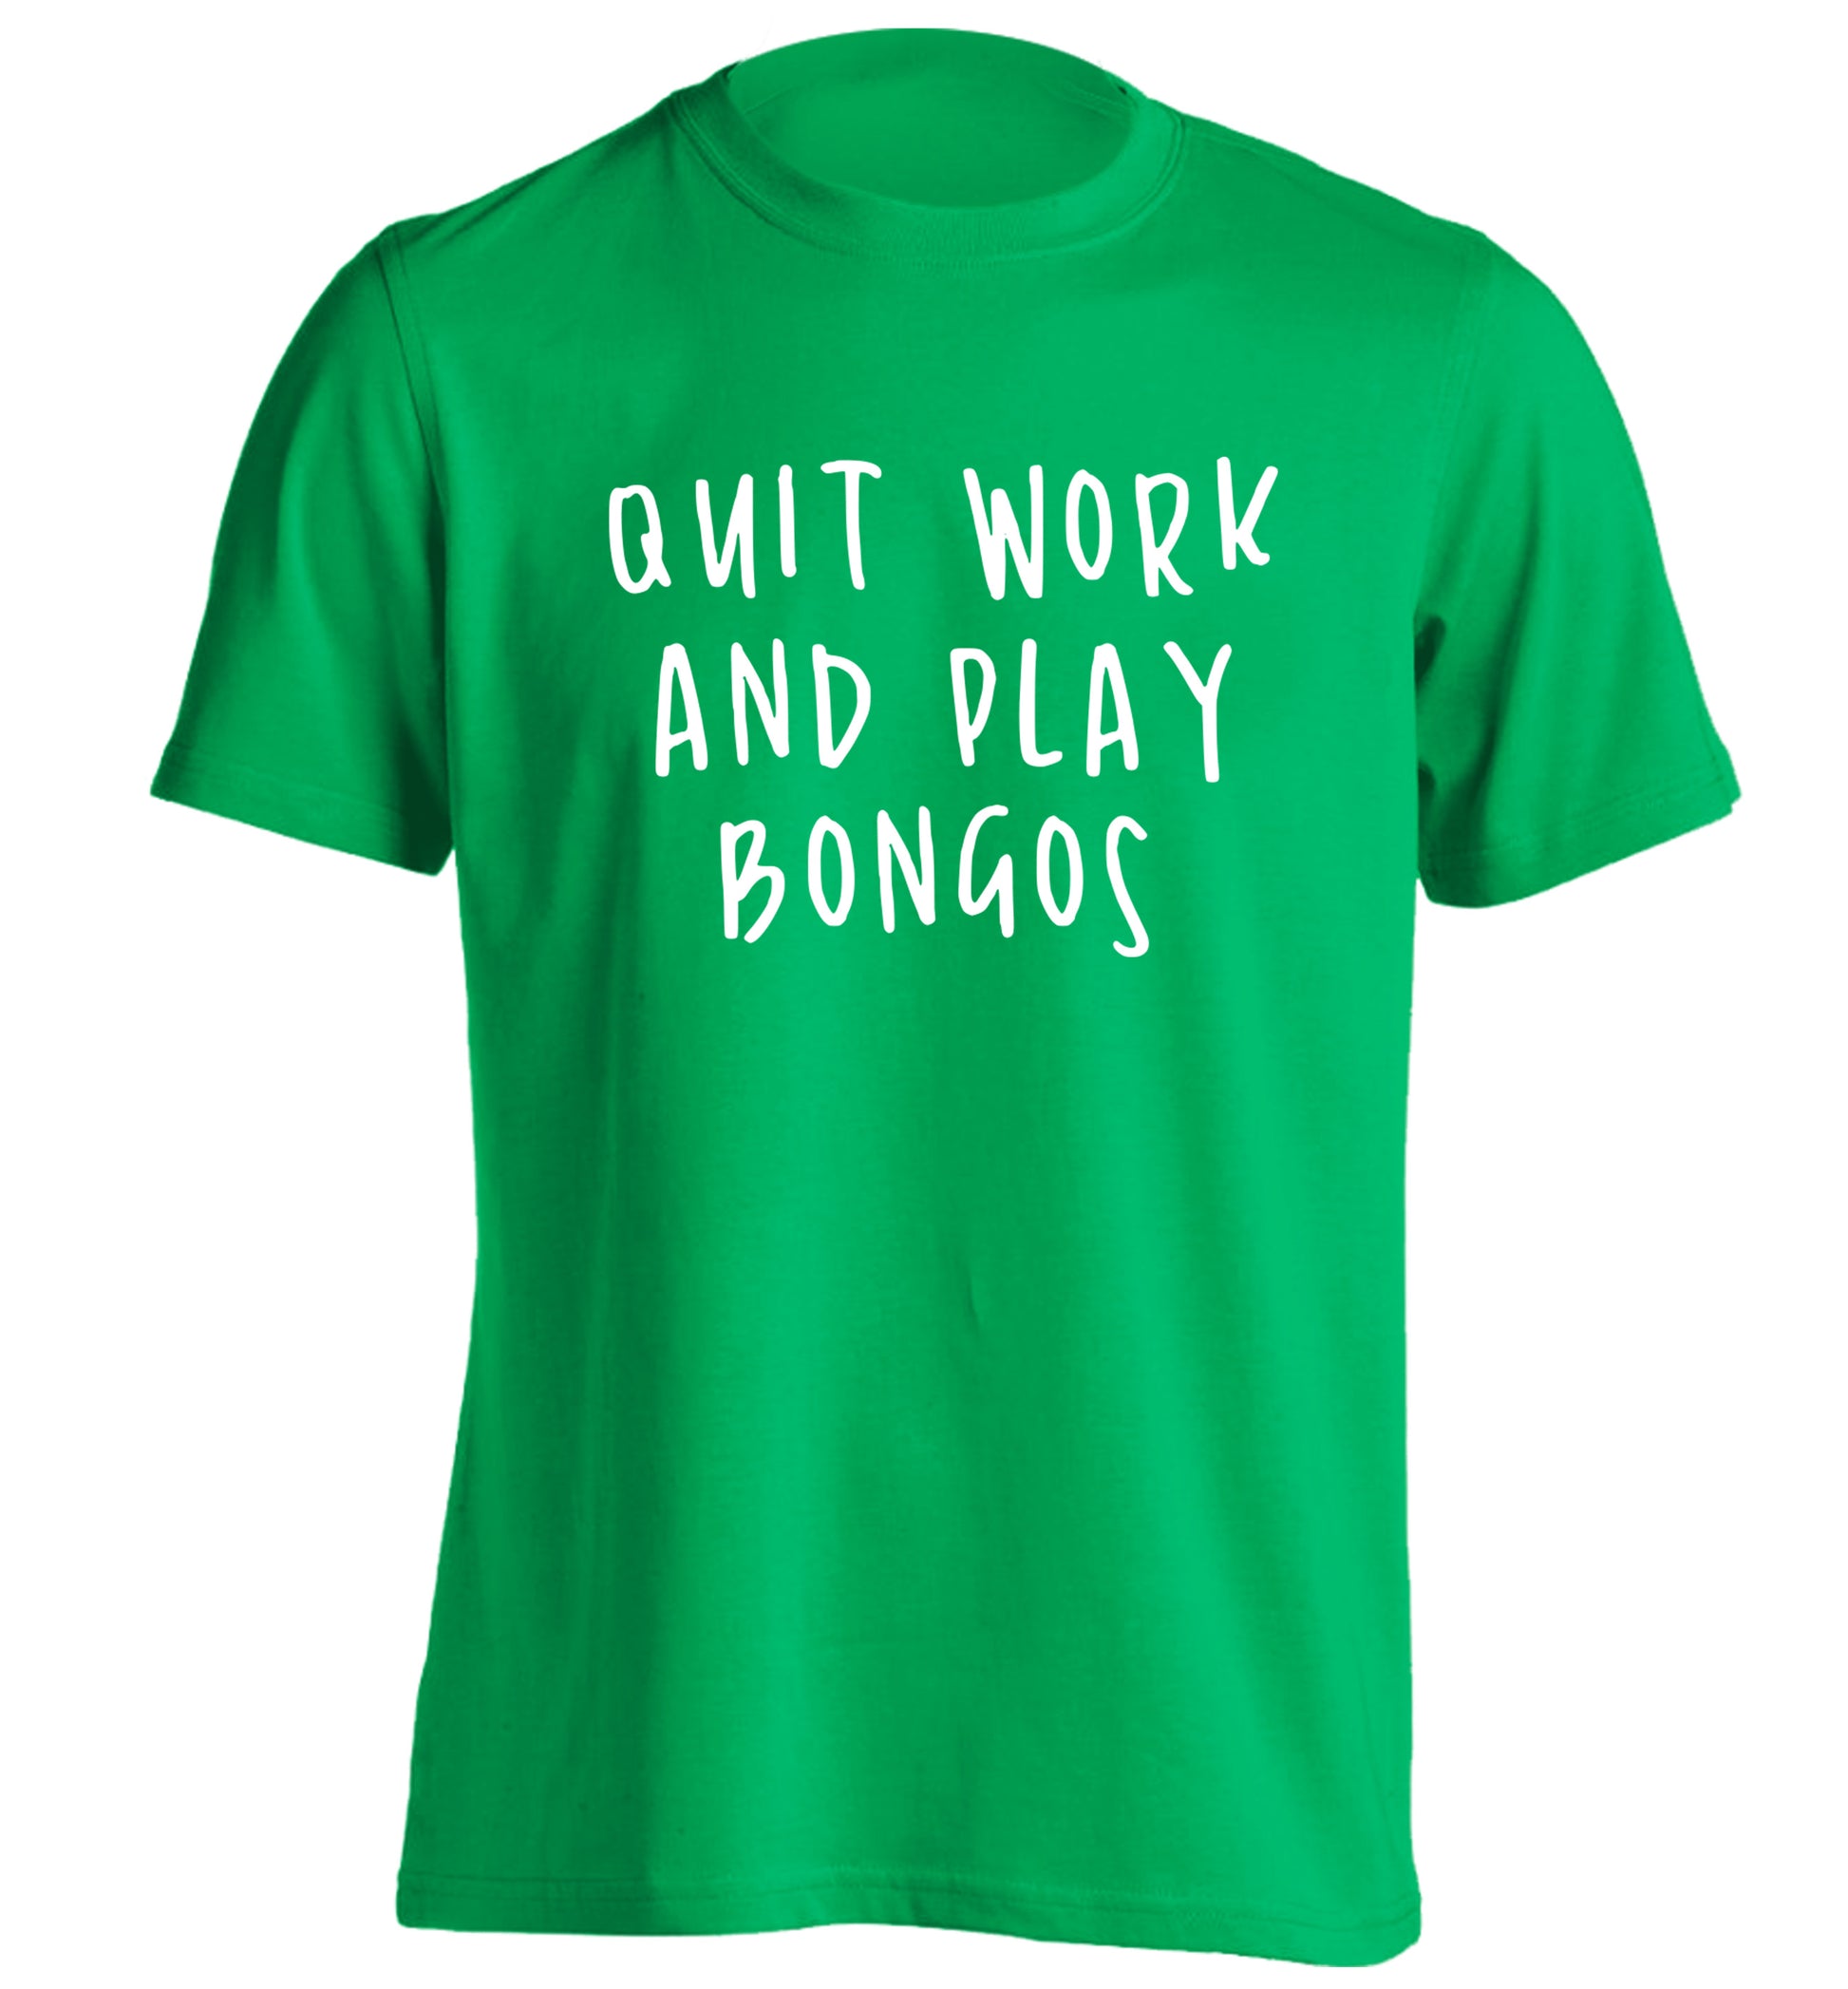 Quit work and play bongos adults unisex green Tshirt 2XL